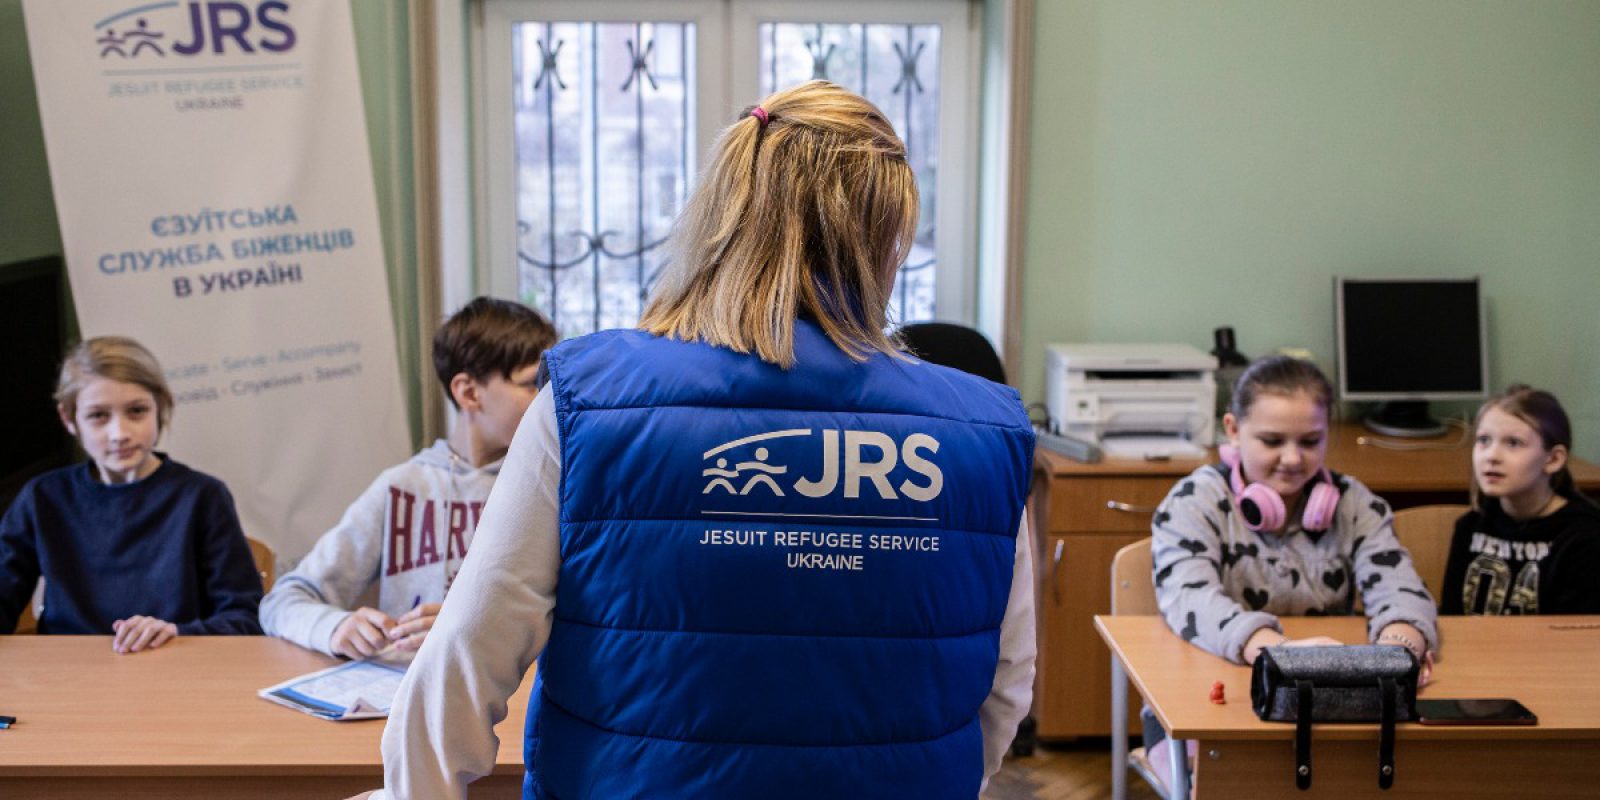 The One Proposal is the coordinated response of the Society of Jesus to the crisis in Ukraine following the outbreak of war. JRS team in Ukraine (Sergi Camara/Jesuit Refugee Service)